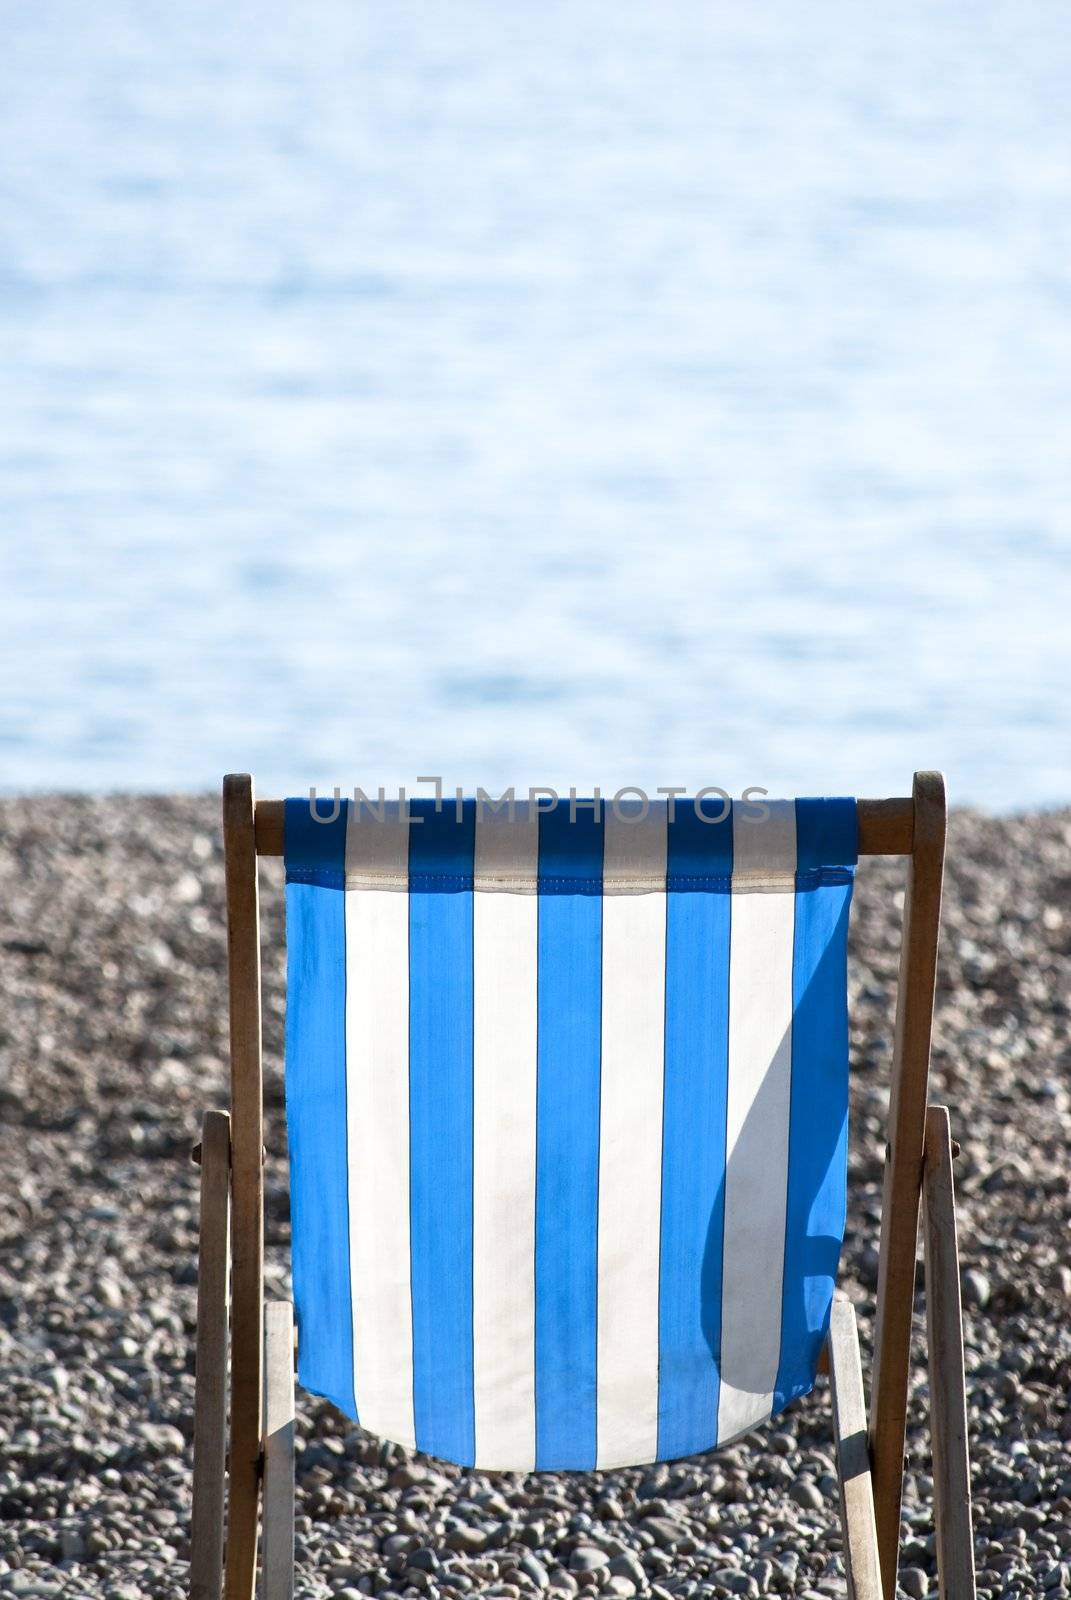 A solitary, empty, blue and white striped deckchair sitting on a pebble beach on a sunny day, with sea in soft focus in the background.